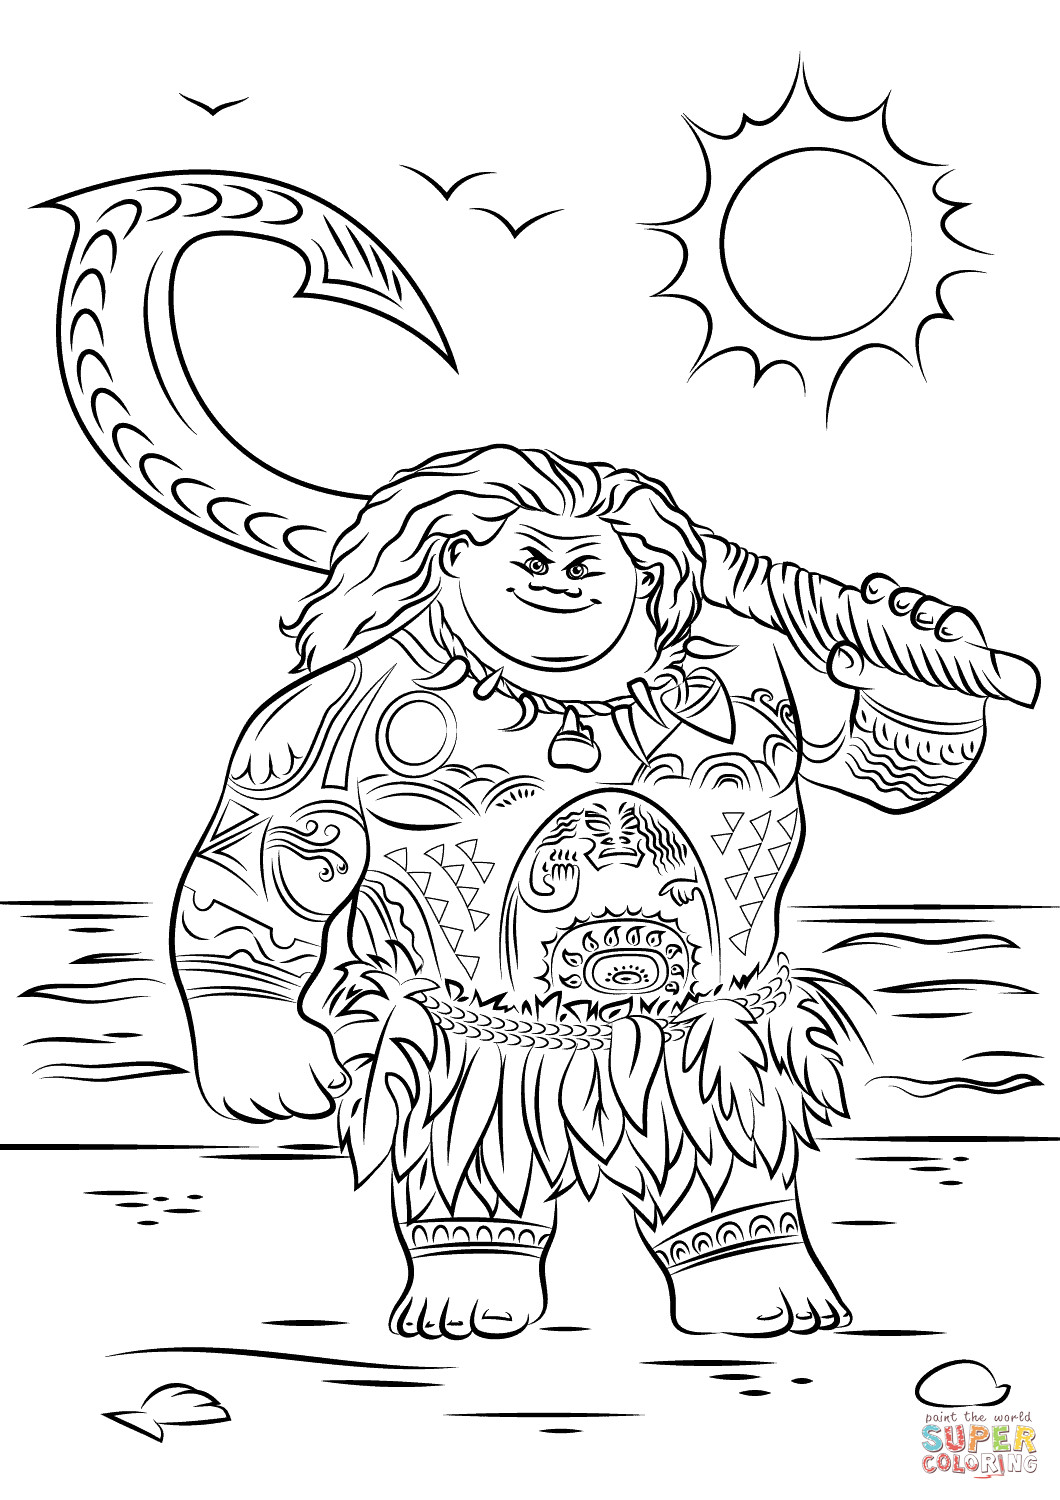 Moana Coloring Pages For Toddlers
 Maui from Moana coloring page